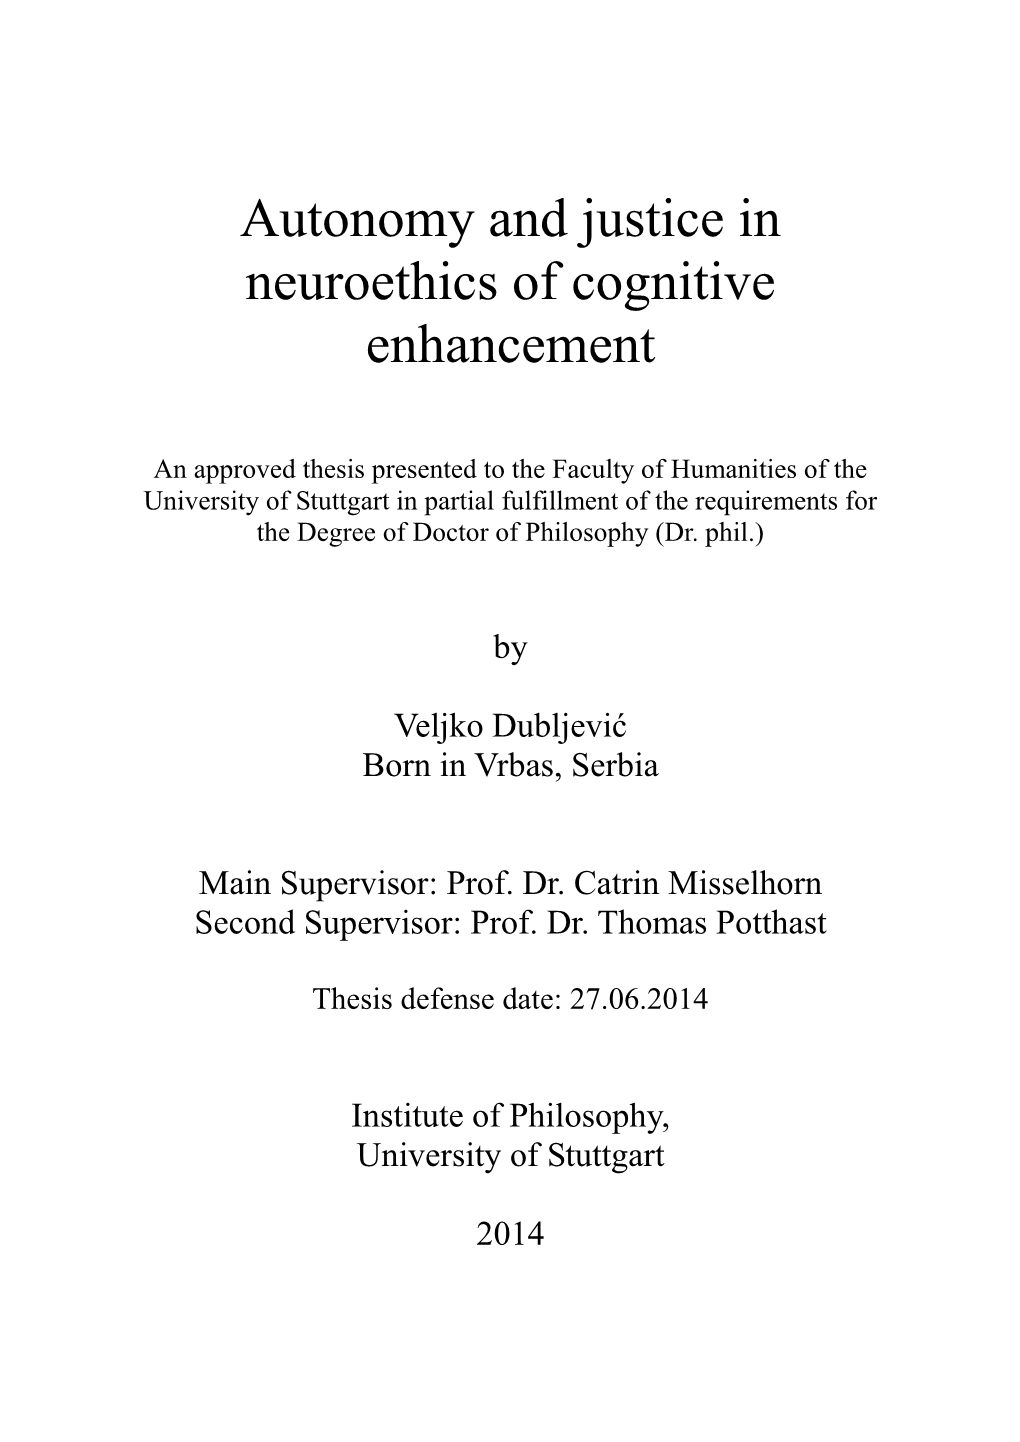 Autonomy and Justice in Neuroethics of Cognitive Enhancement